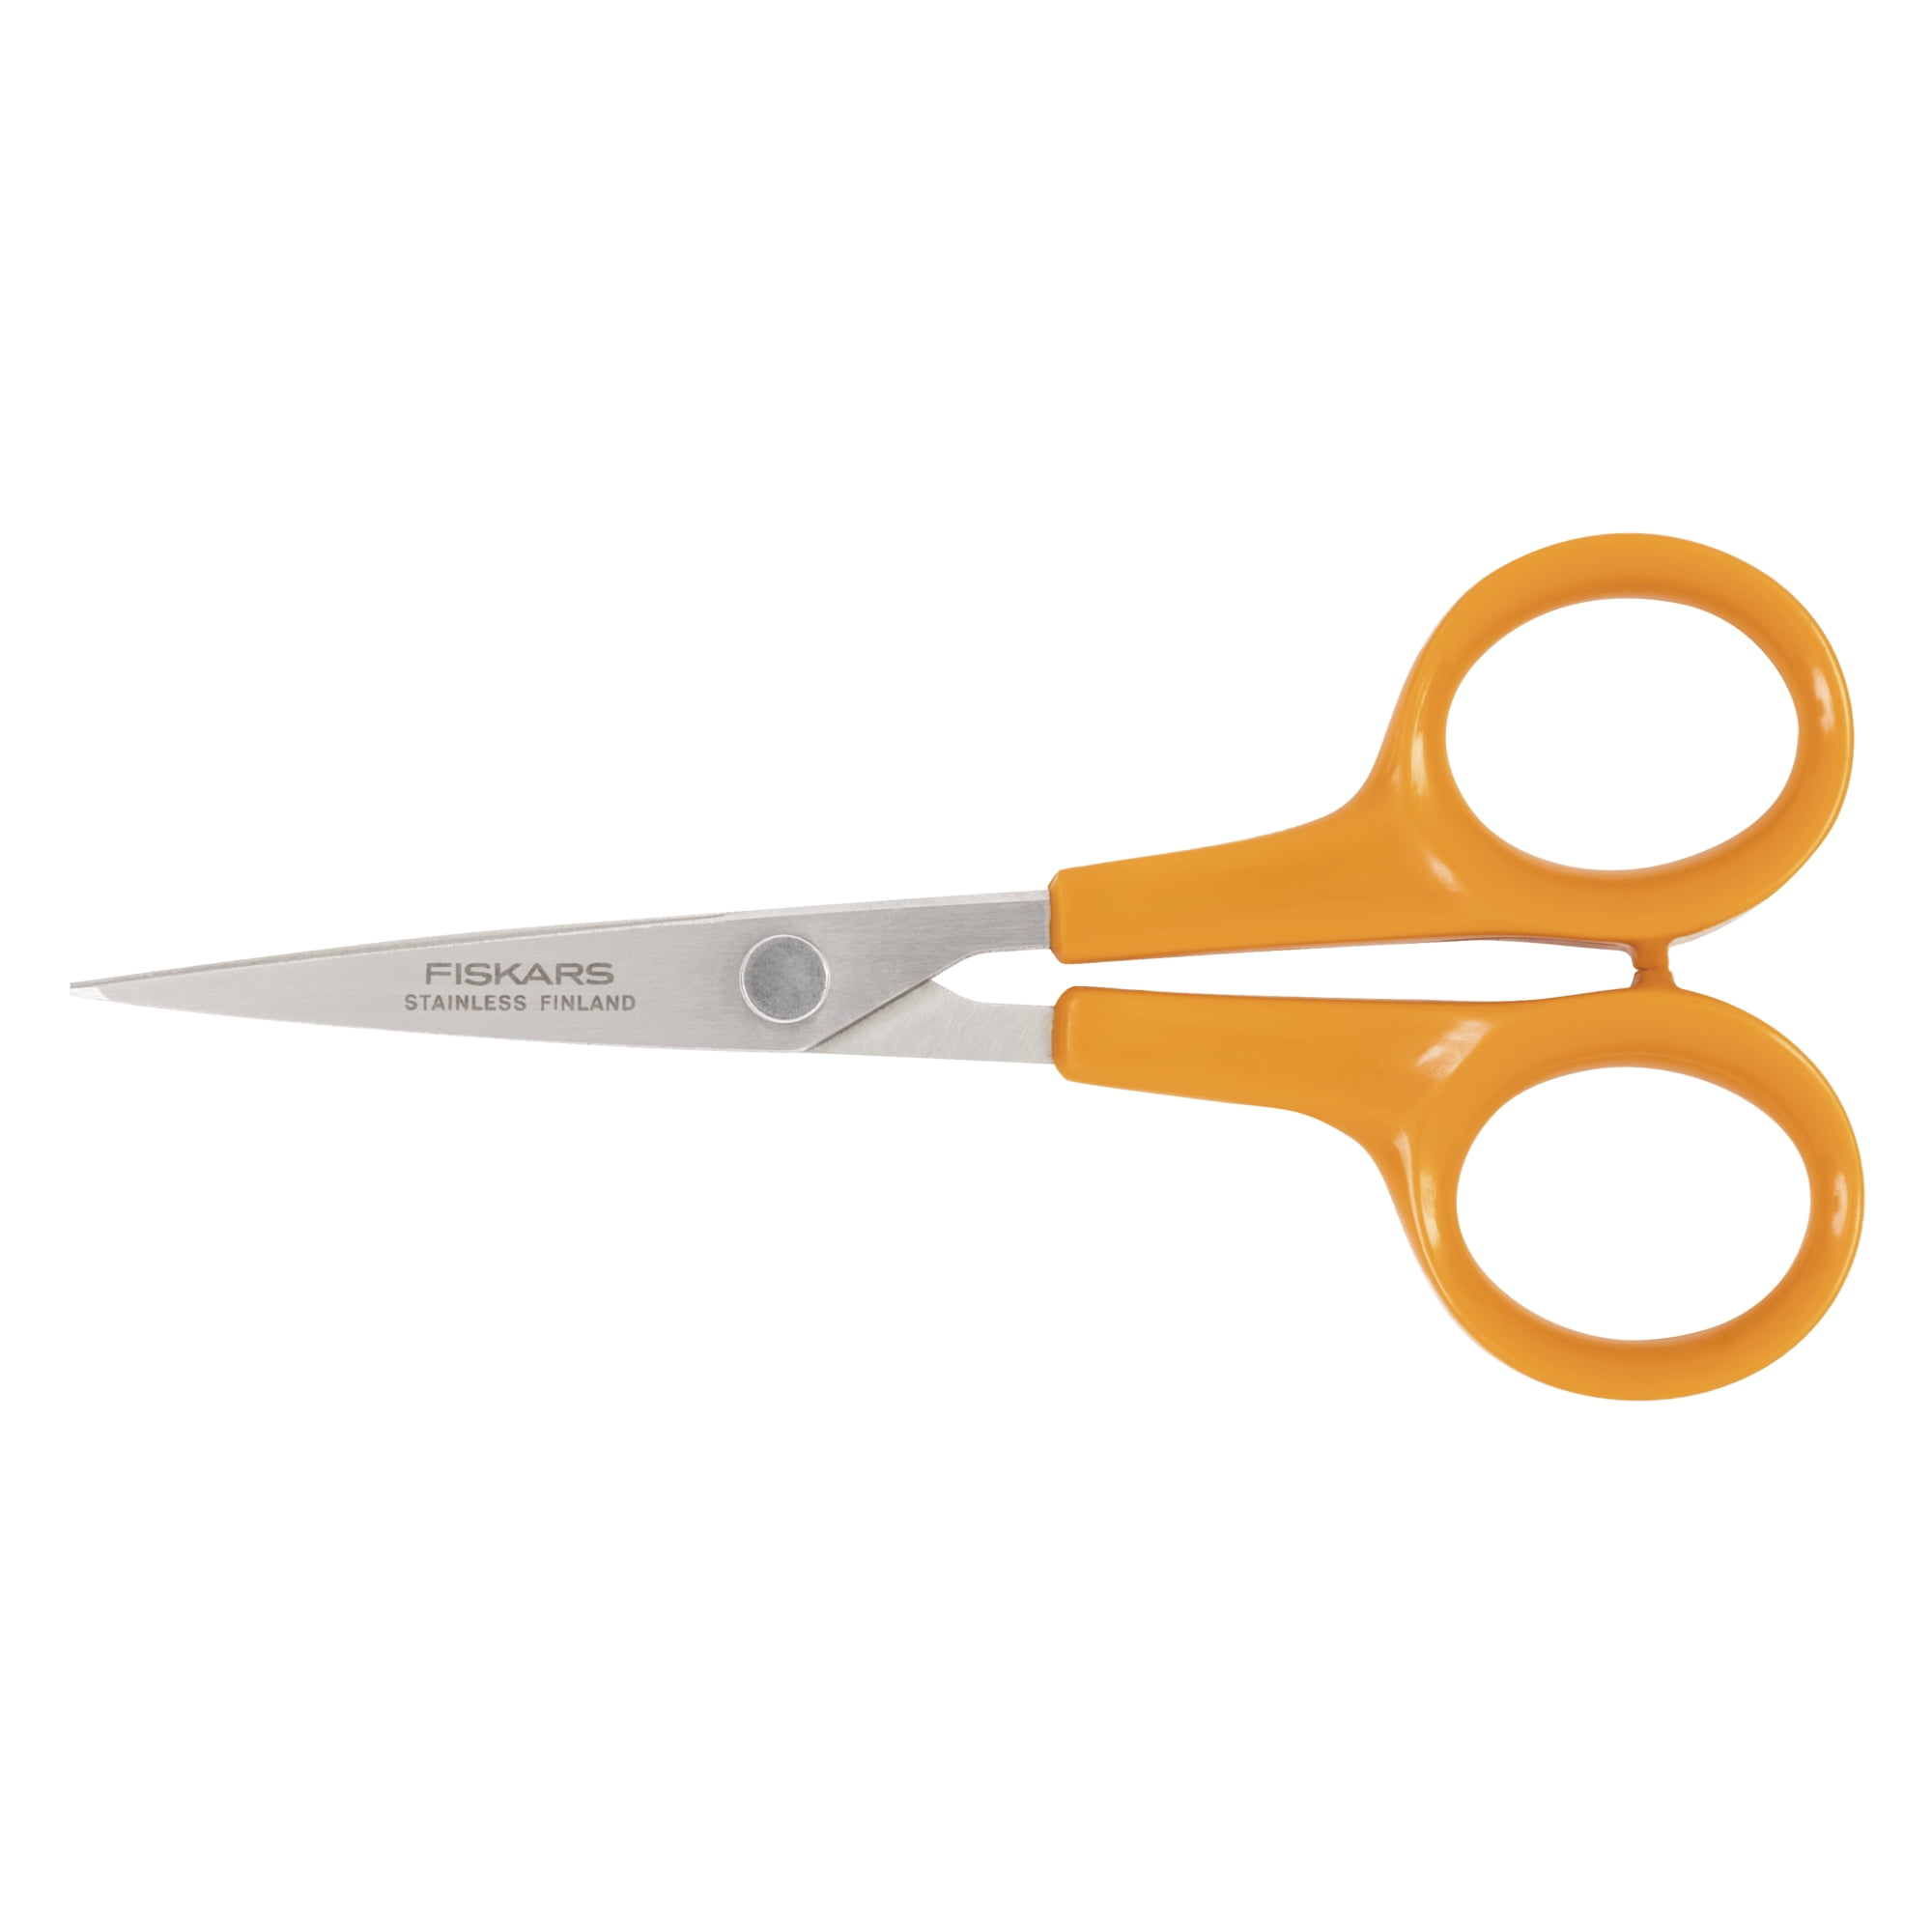 Fiskars SoftGrip Micro-Tip Scissors - Fabric Scissors for Sewing, Arts, and  Crafts - 5 Stainless Steel